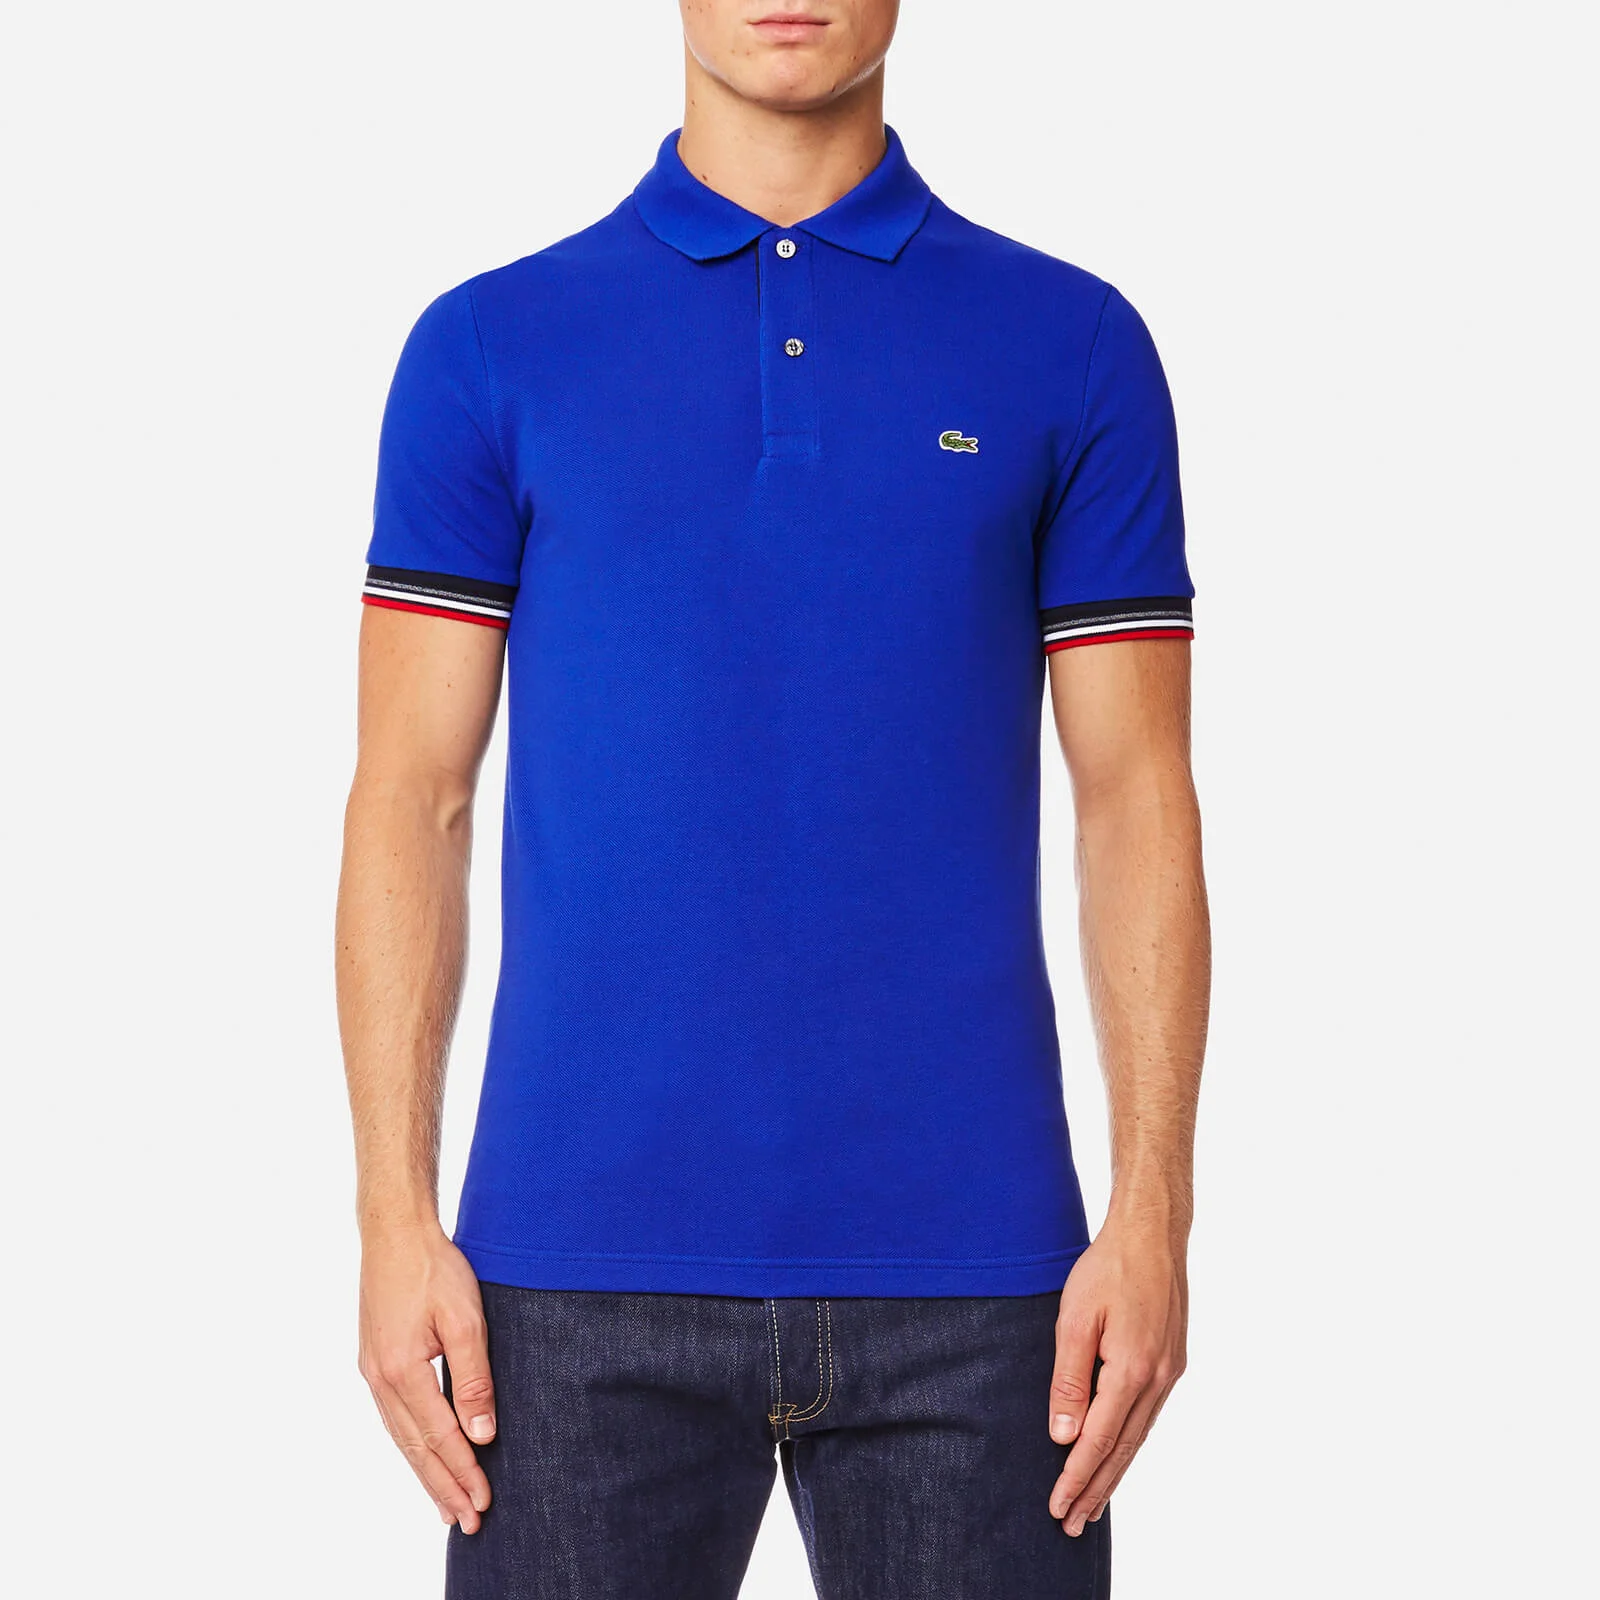 Lacoste Men's Tipped Sleeve Polo Shirt - Steamer Image 1